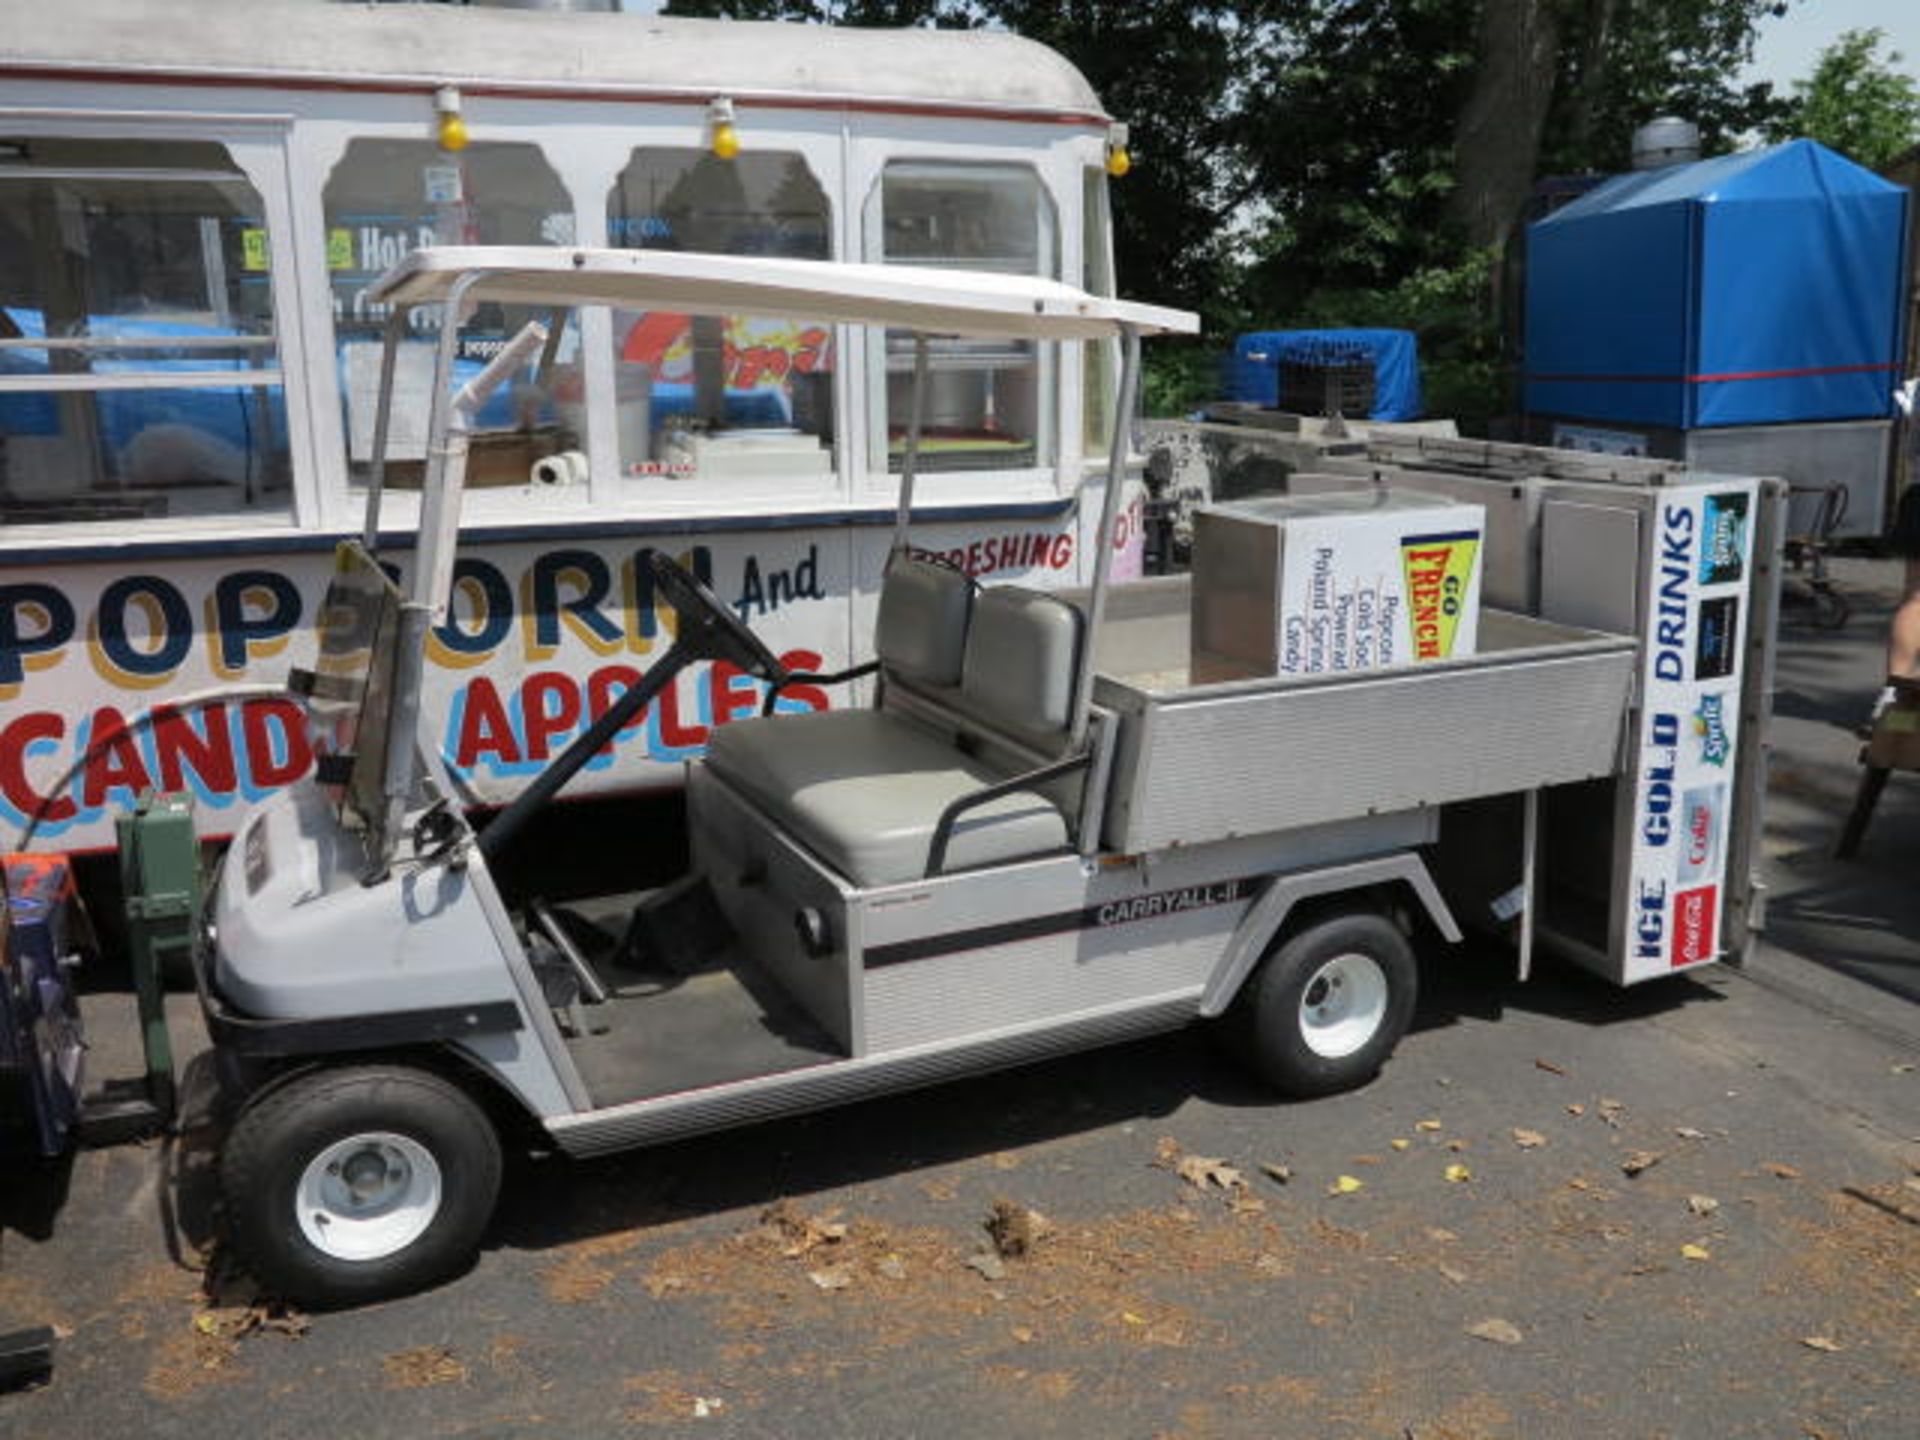 Club Car Carry All II Golf Cart with Dump Trailer including additional Canopy and Beverage Cart